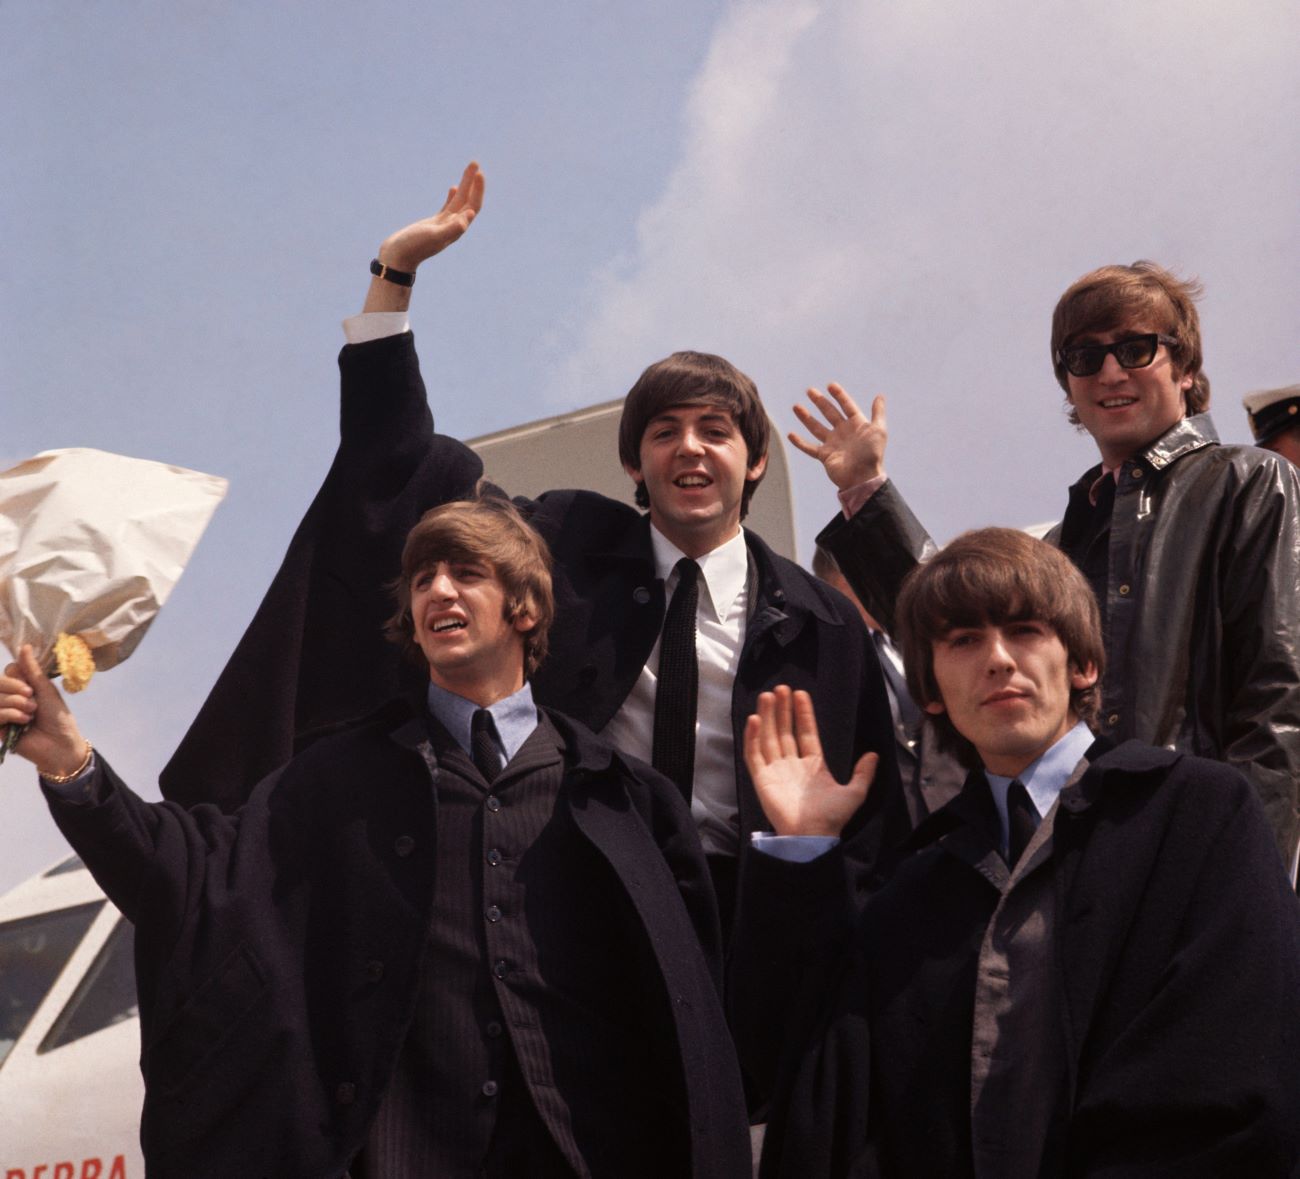 Ringo Starr, Paul McCartney, George Harrison, and John Lennon of The Beatles wave from outside an airplane door.